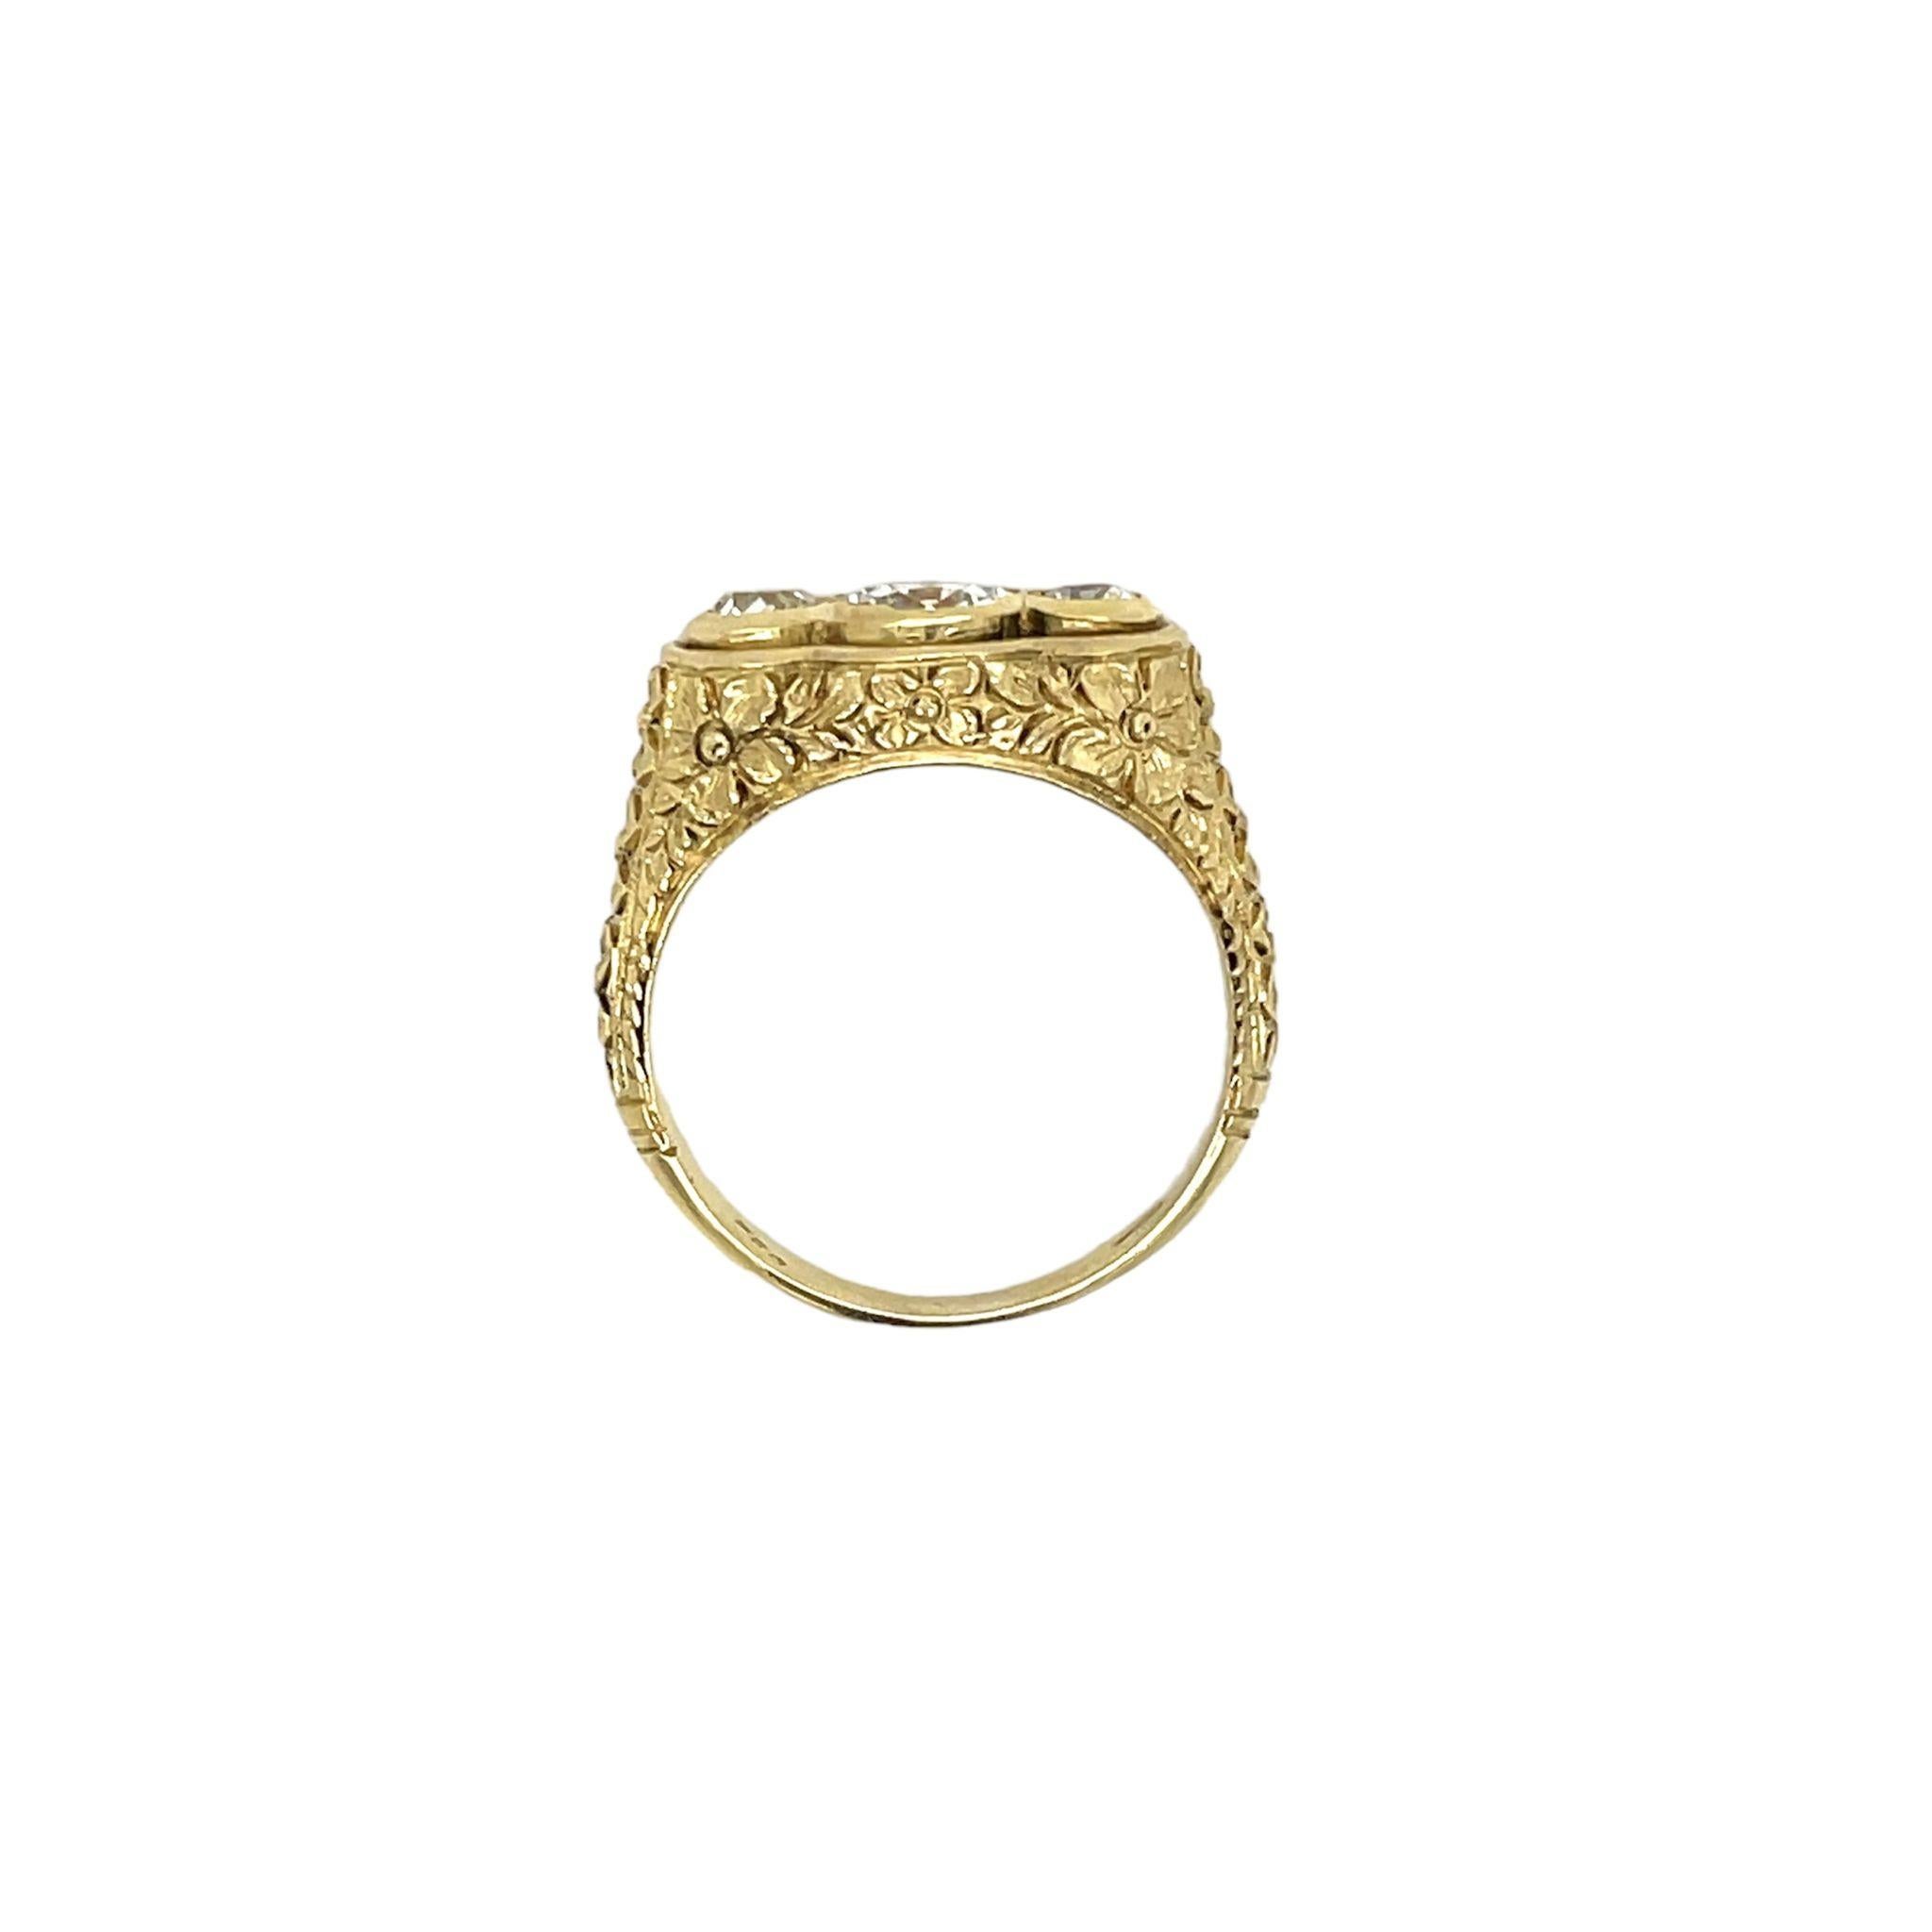 Gorgeous design ring, dated '1900, handcrafted in 18K gold. The Center is embellished with a large sparkling Old mine cut Diamond  weight 0,68 Carat graded H/I Color Si2 clarity, and on the side 2 smaller diamonds  total weight 0.40 carats, same